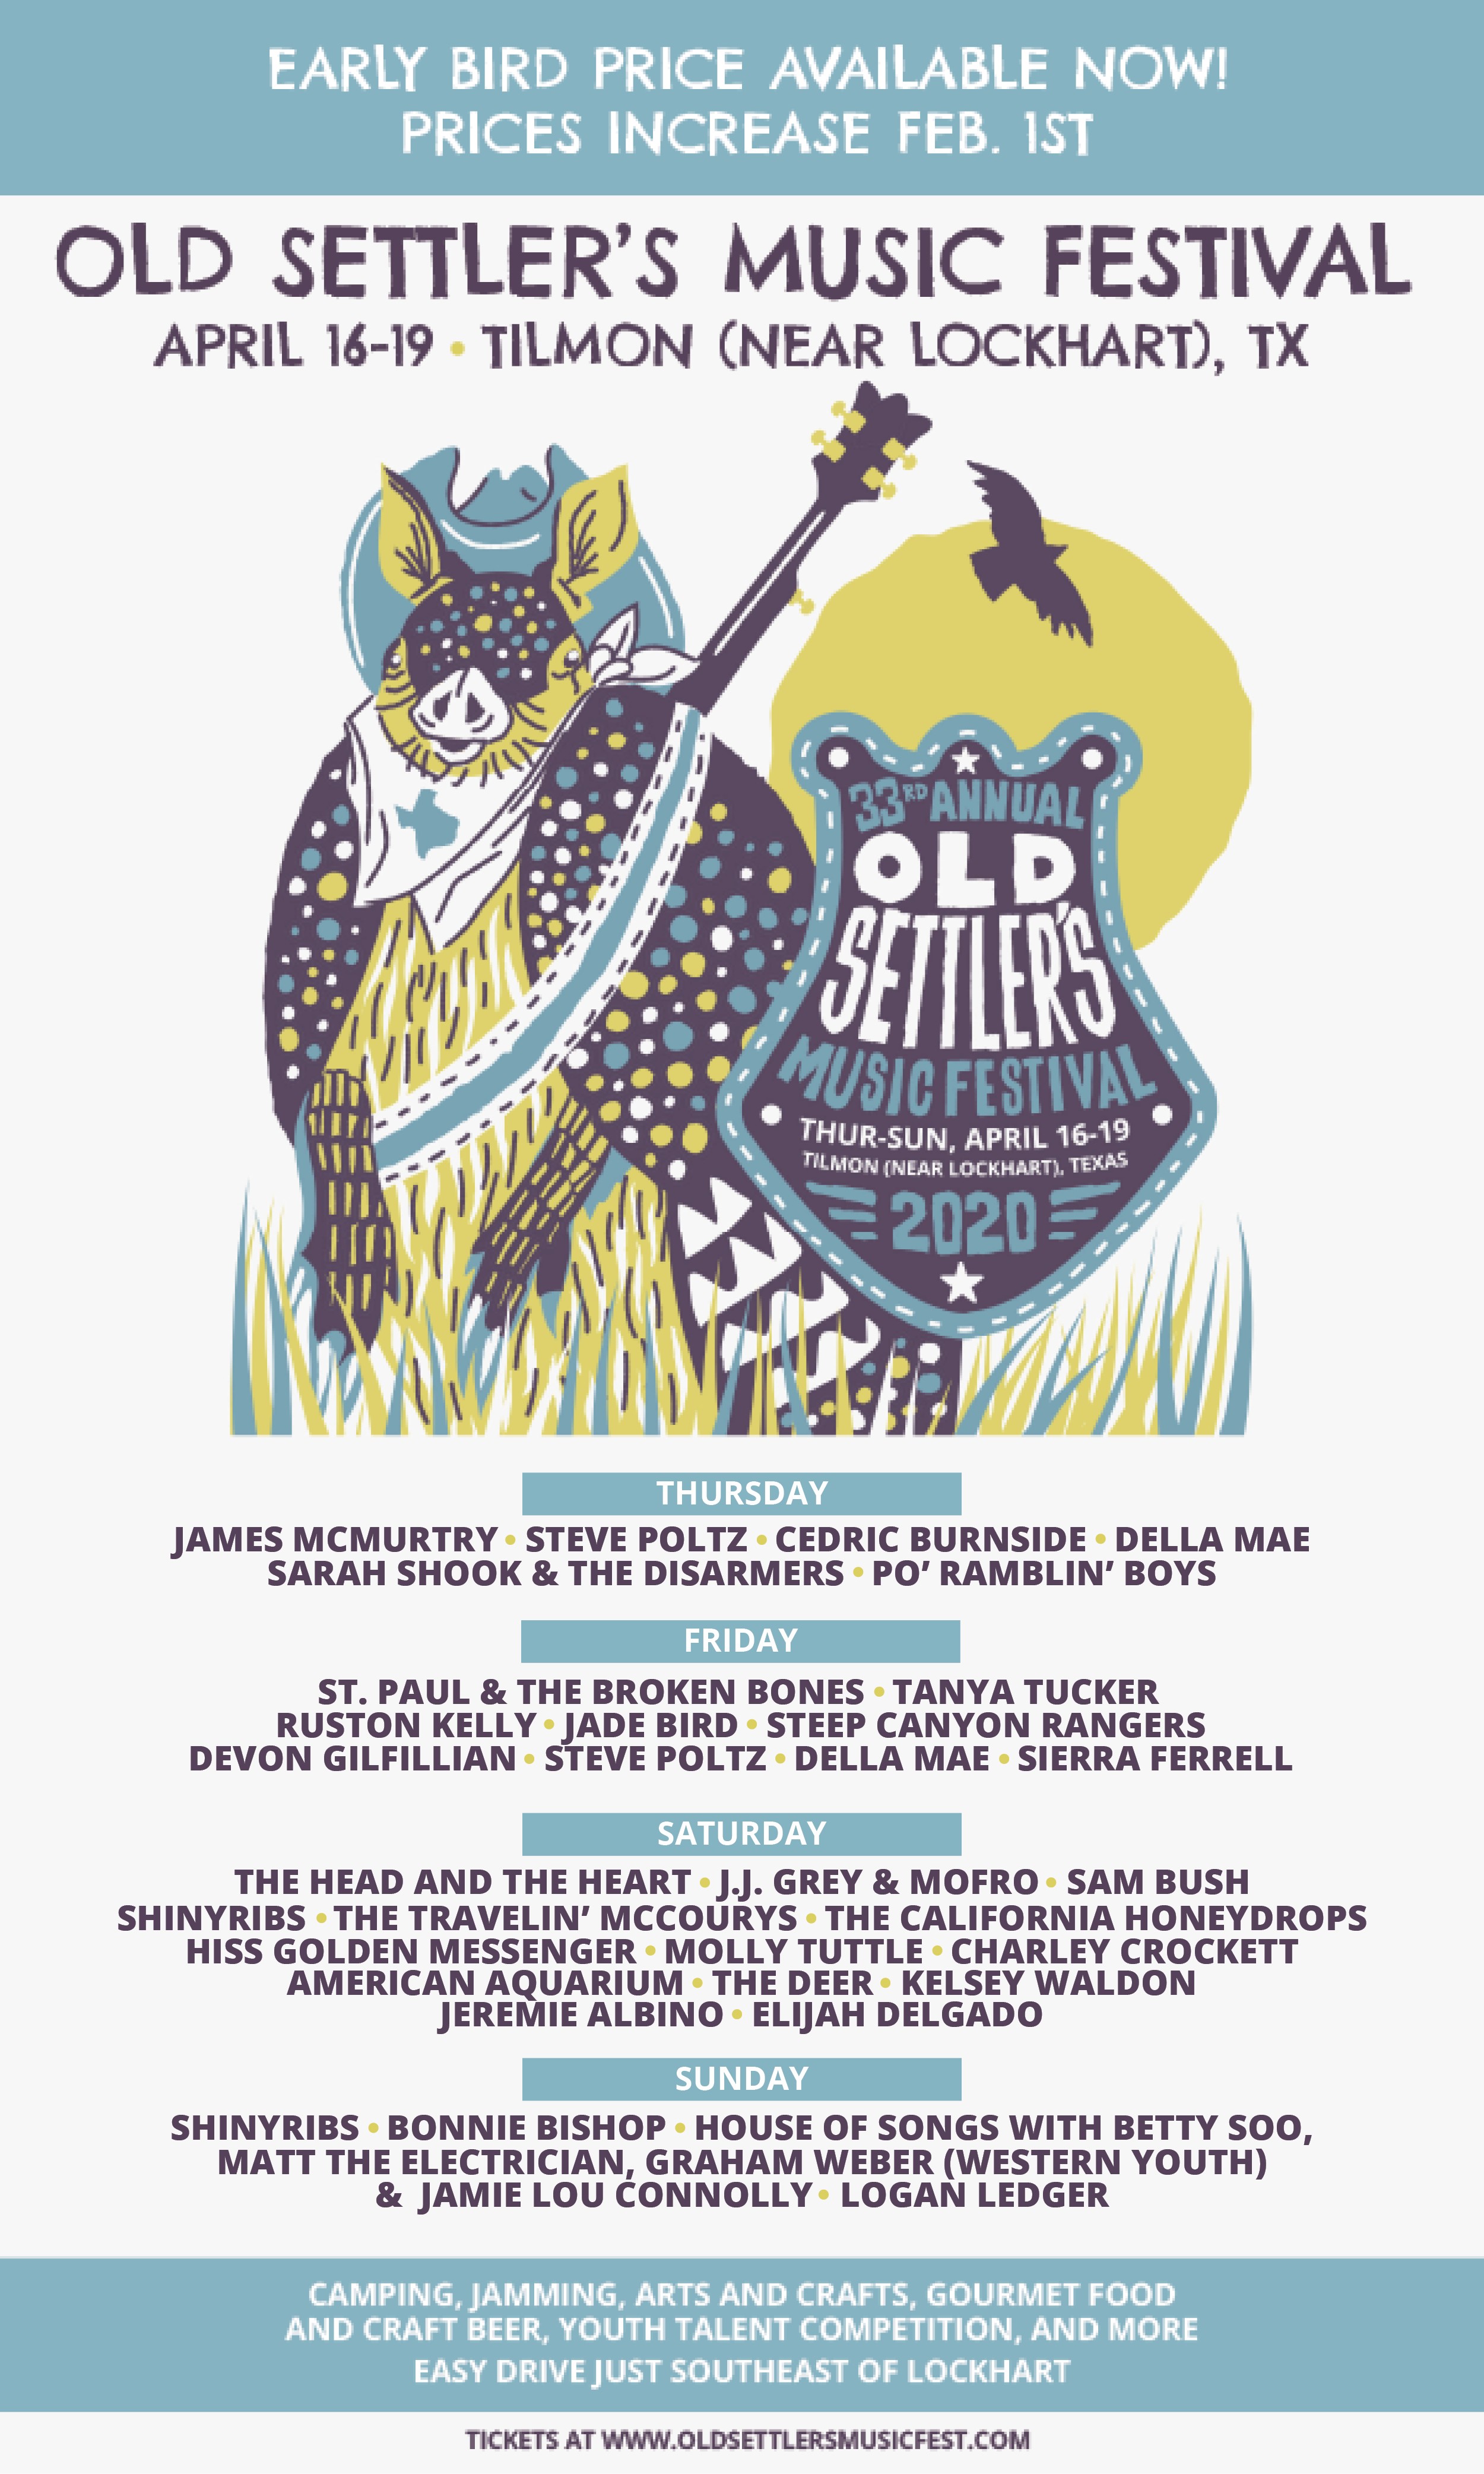 Old Settler's Music Festival Announces New Additions to 33rd Annual Festival Lineup